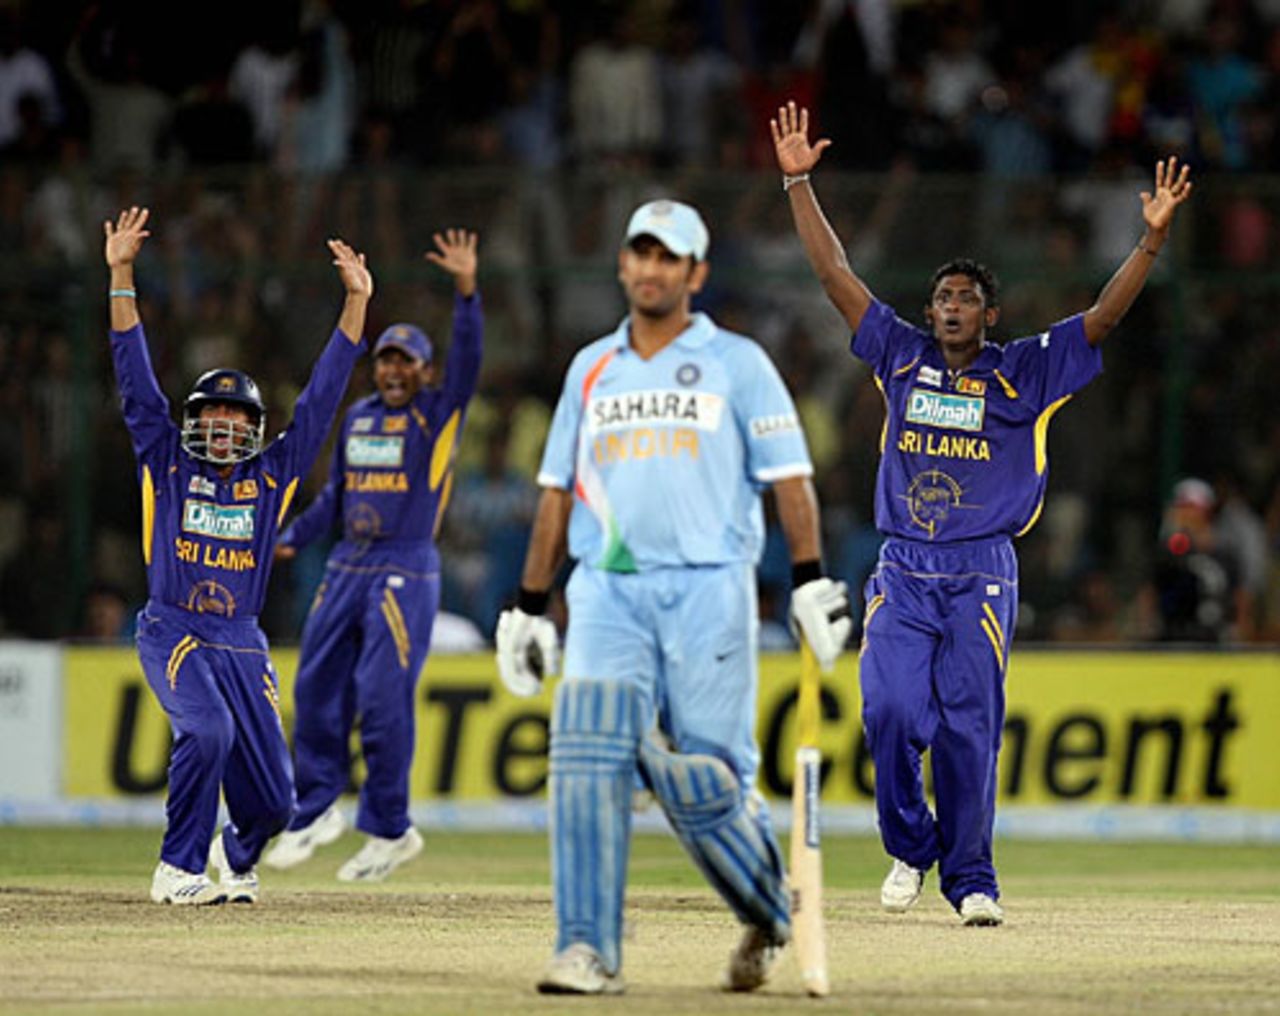 Mahendra Singh Dhoni held on as wickets tumbled at the other end, India v Sri Lanka, Asia Cup final, Karachi, July 6, 2008